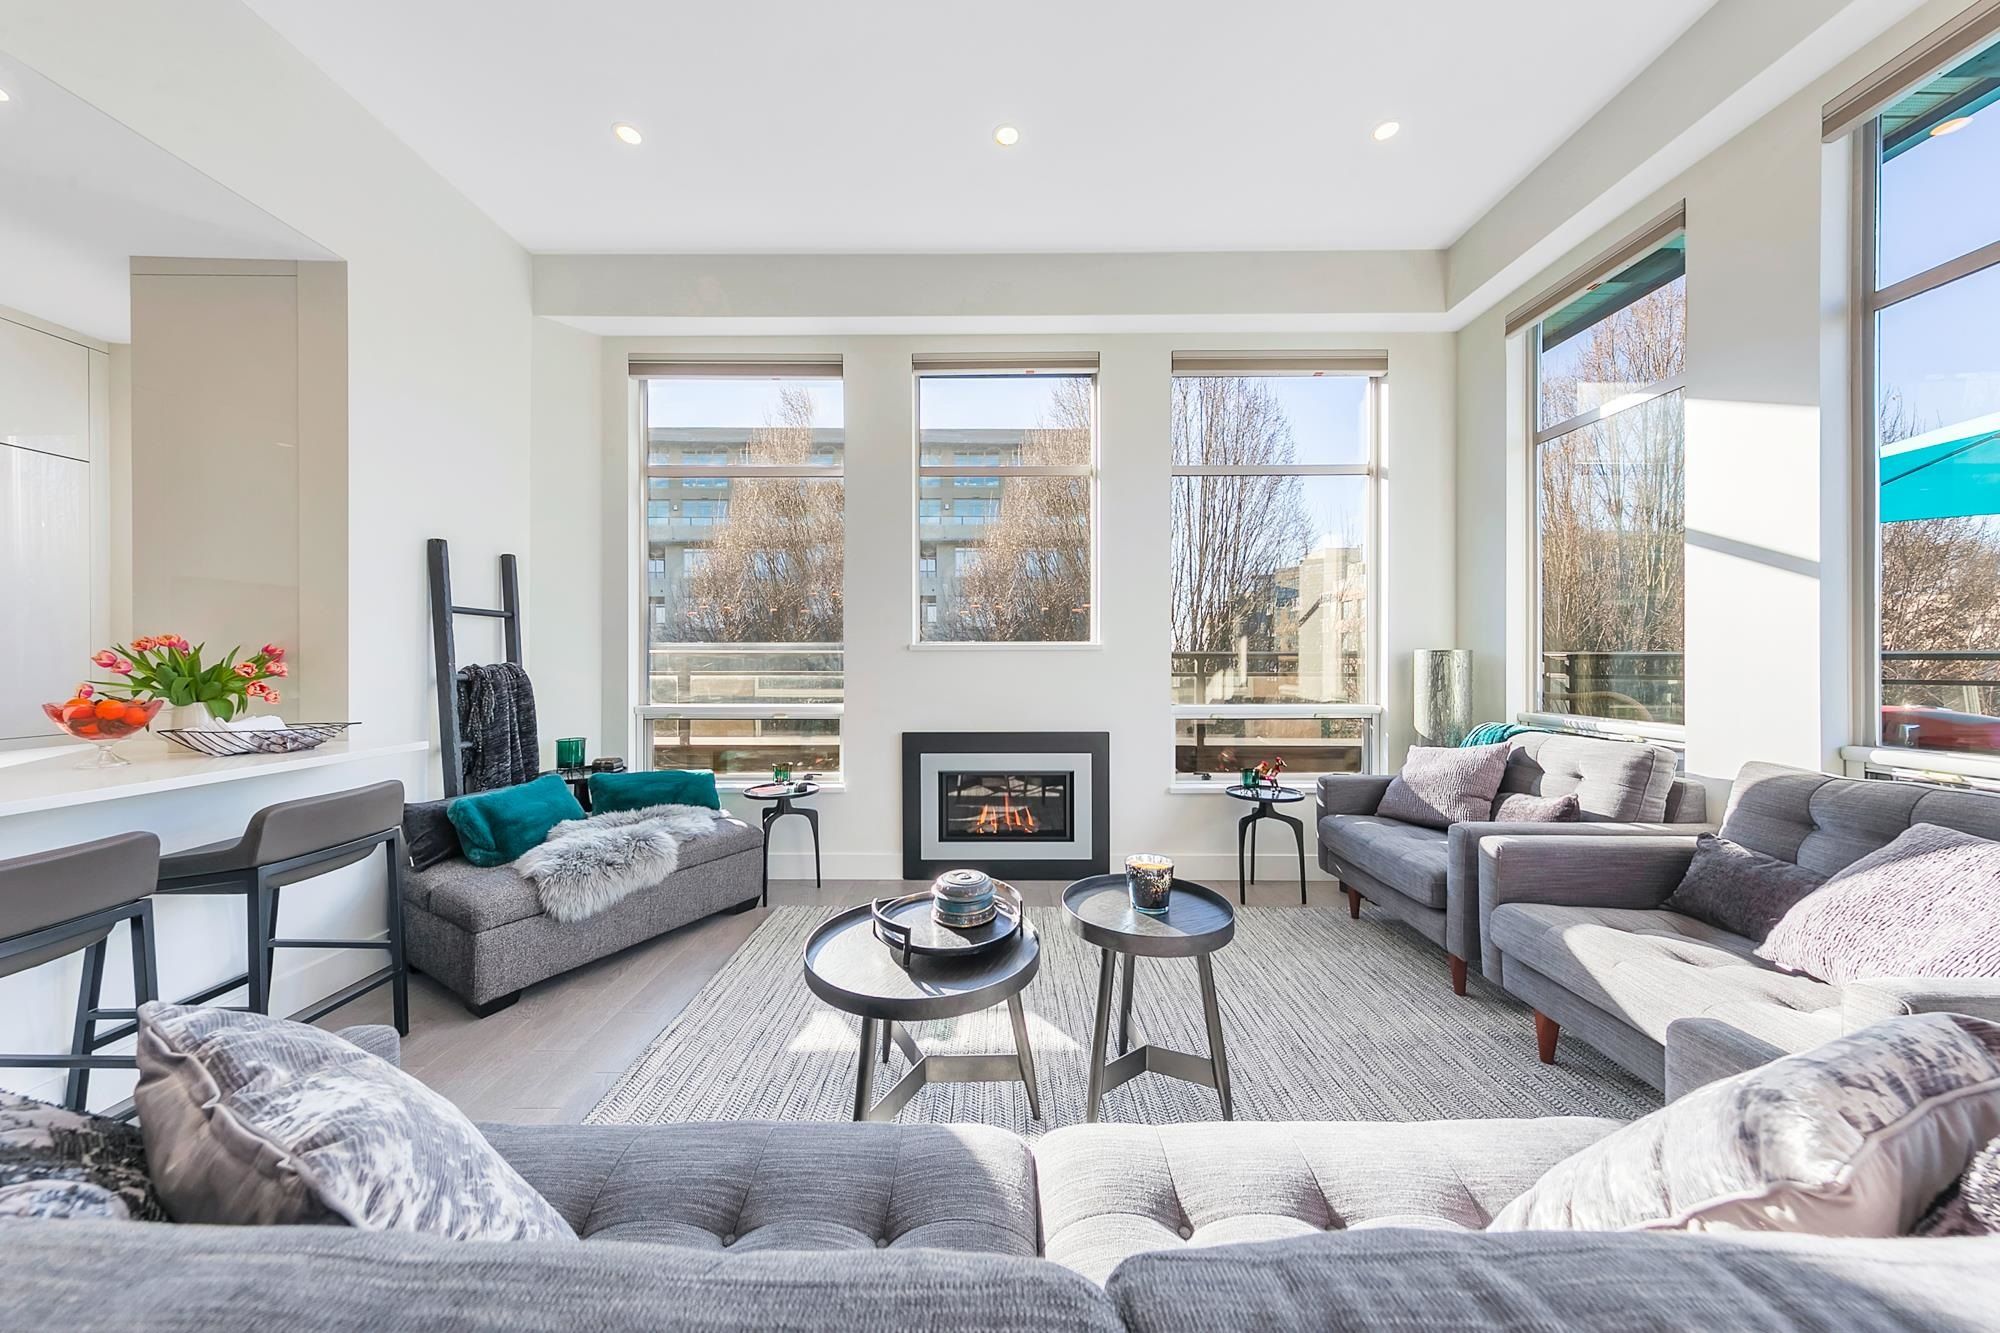 VERY excited to bring to market this rarely available corner penthouse suite overlooking the Arbutus Greenway Park with an absolutely stunning renovation!